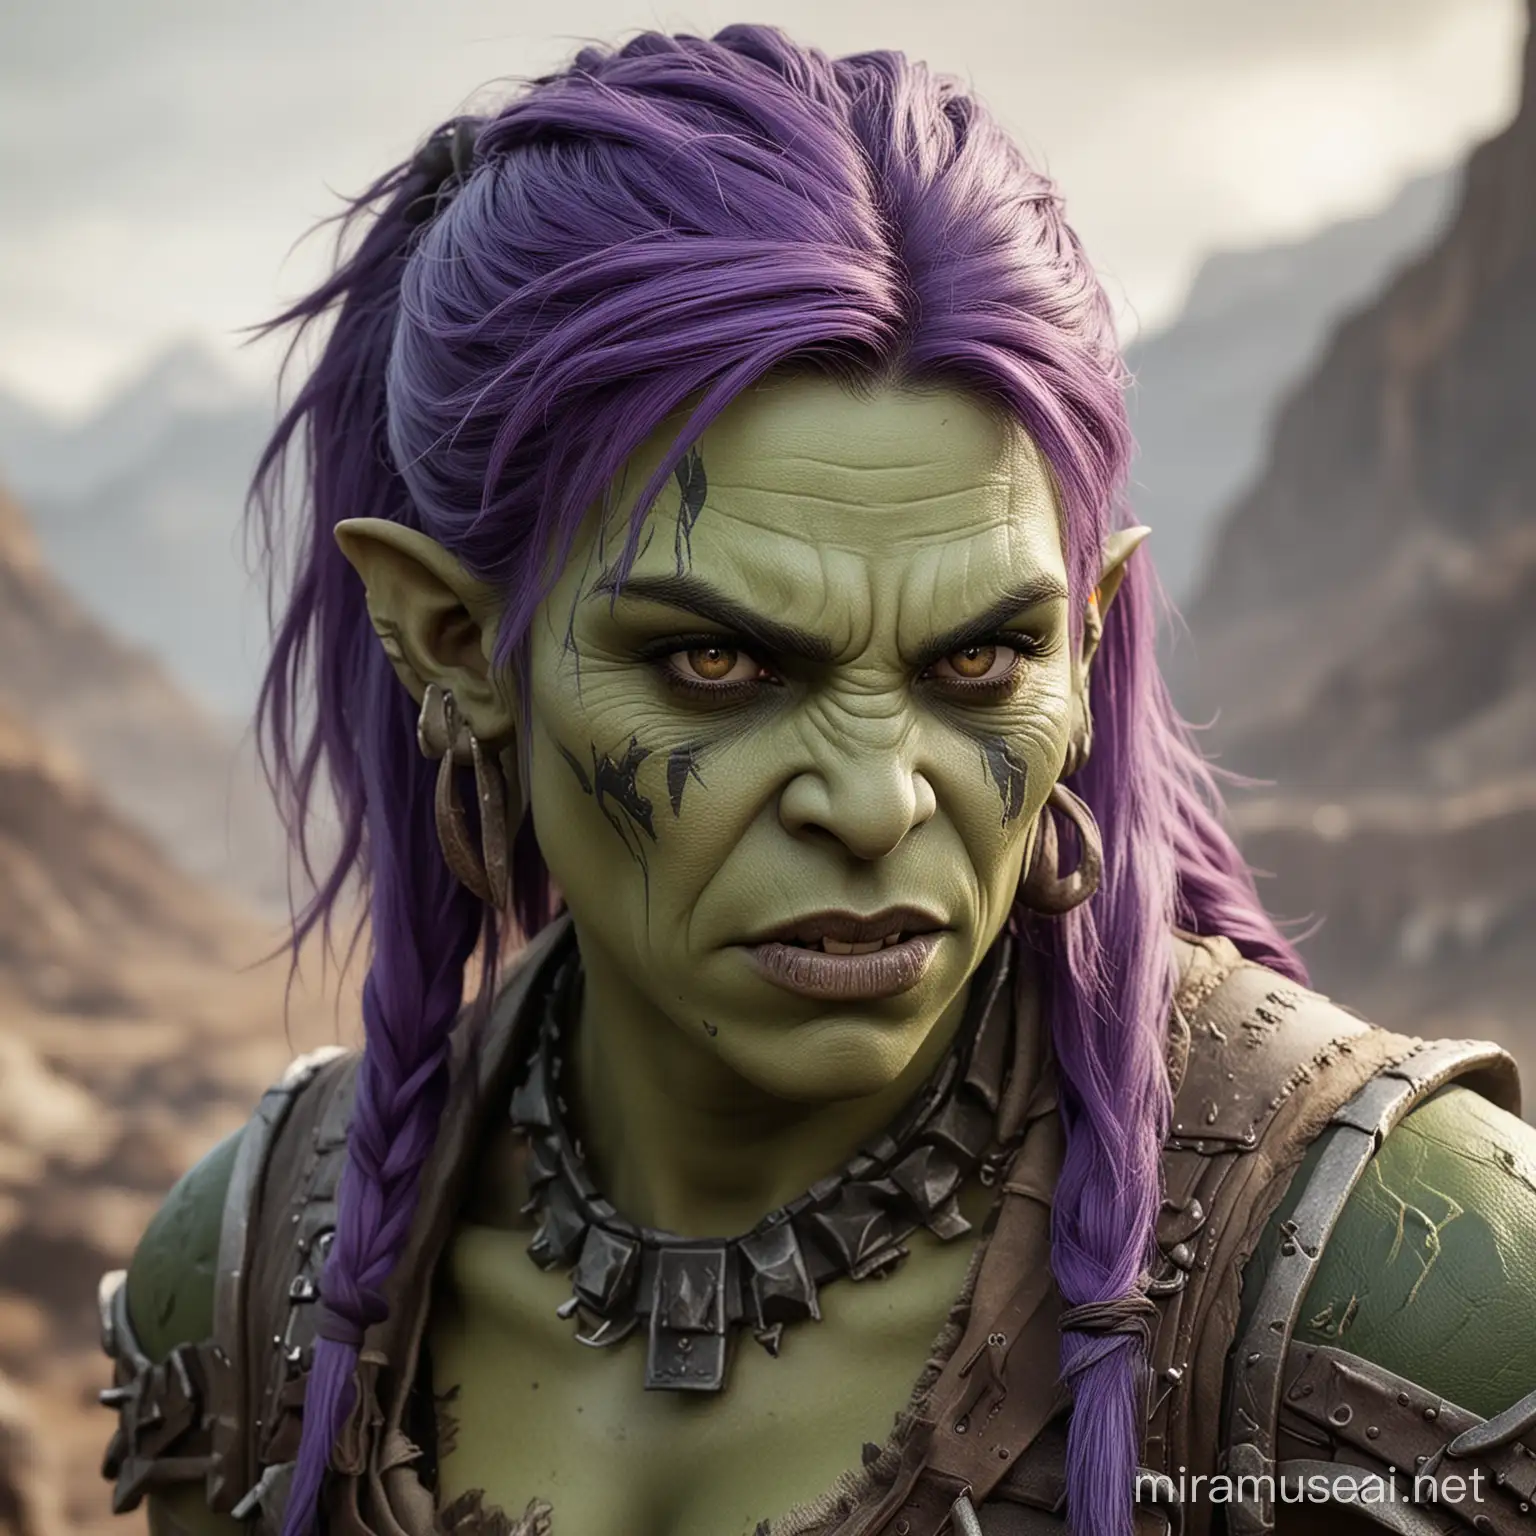 female orc with purple hair. She's tough looking and has long tusks for teeth. She has green skin